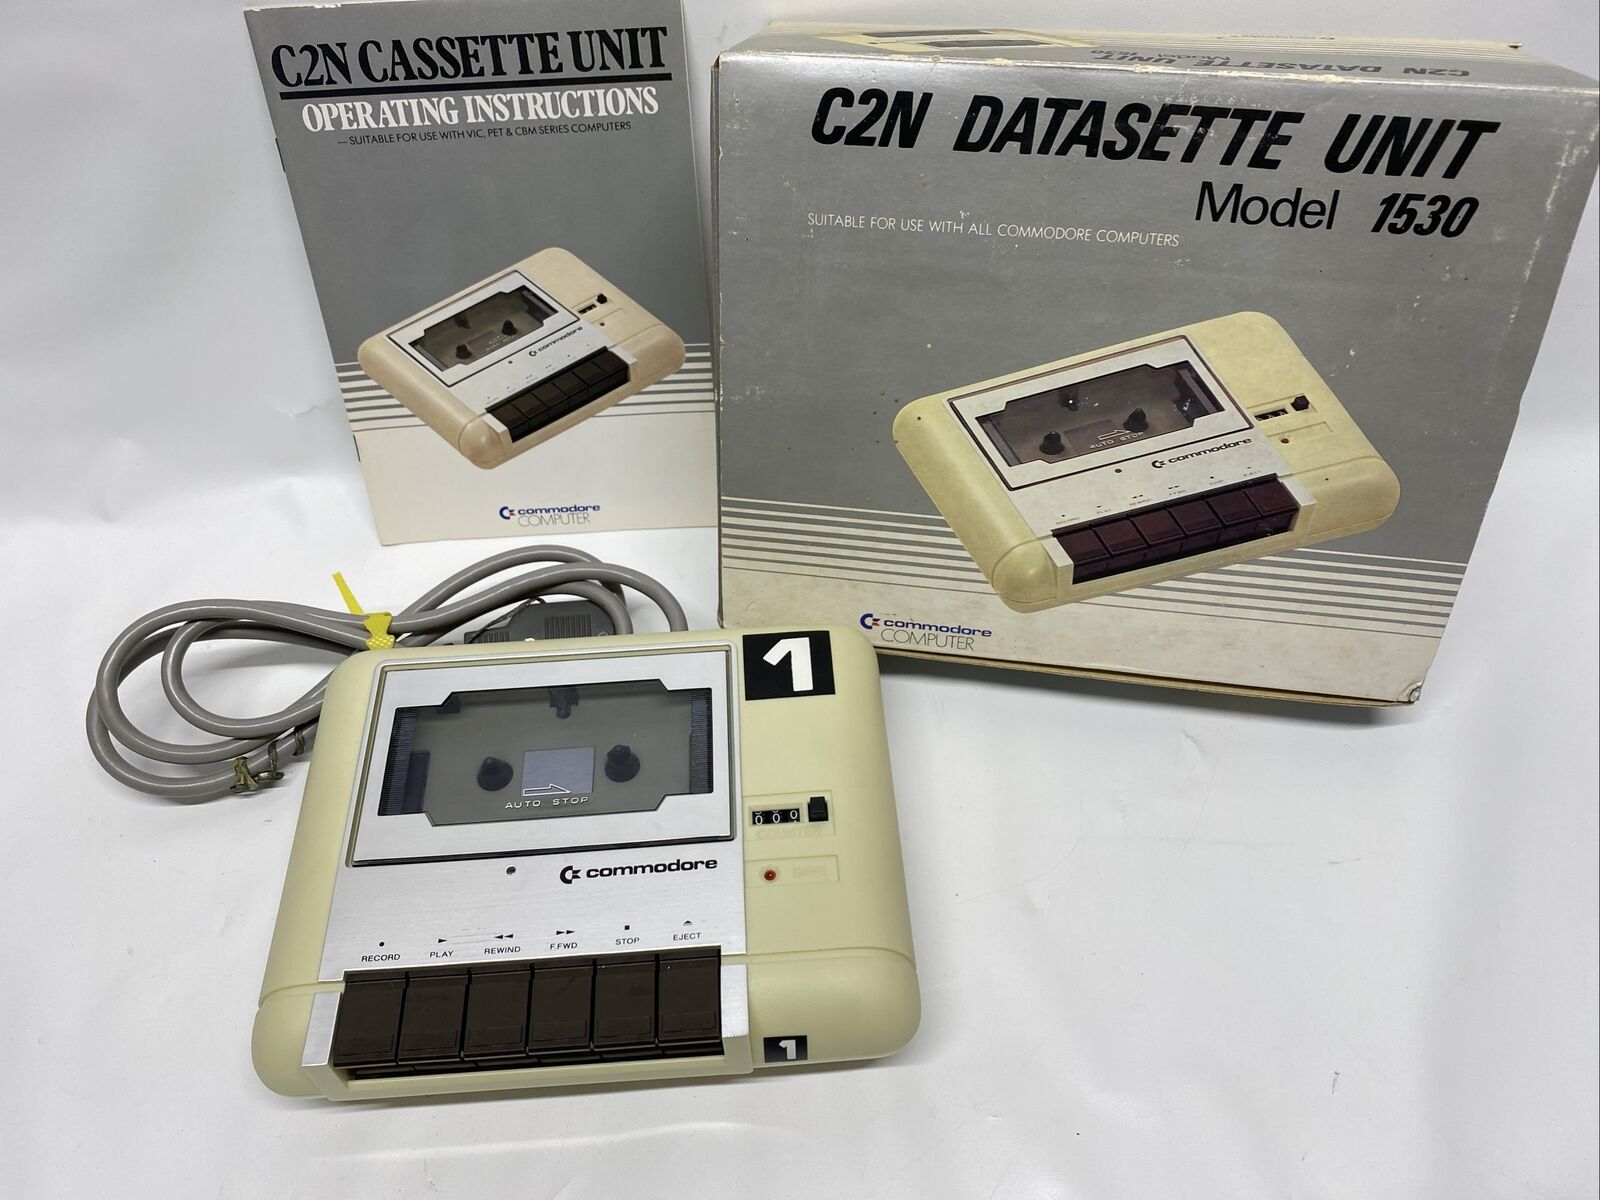 Commodore C2N Datasette Unit Model 1530  Untested Selling For Parts